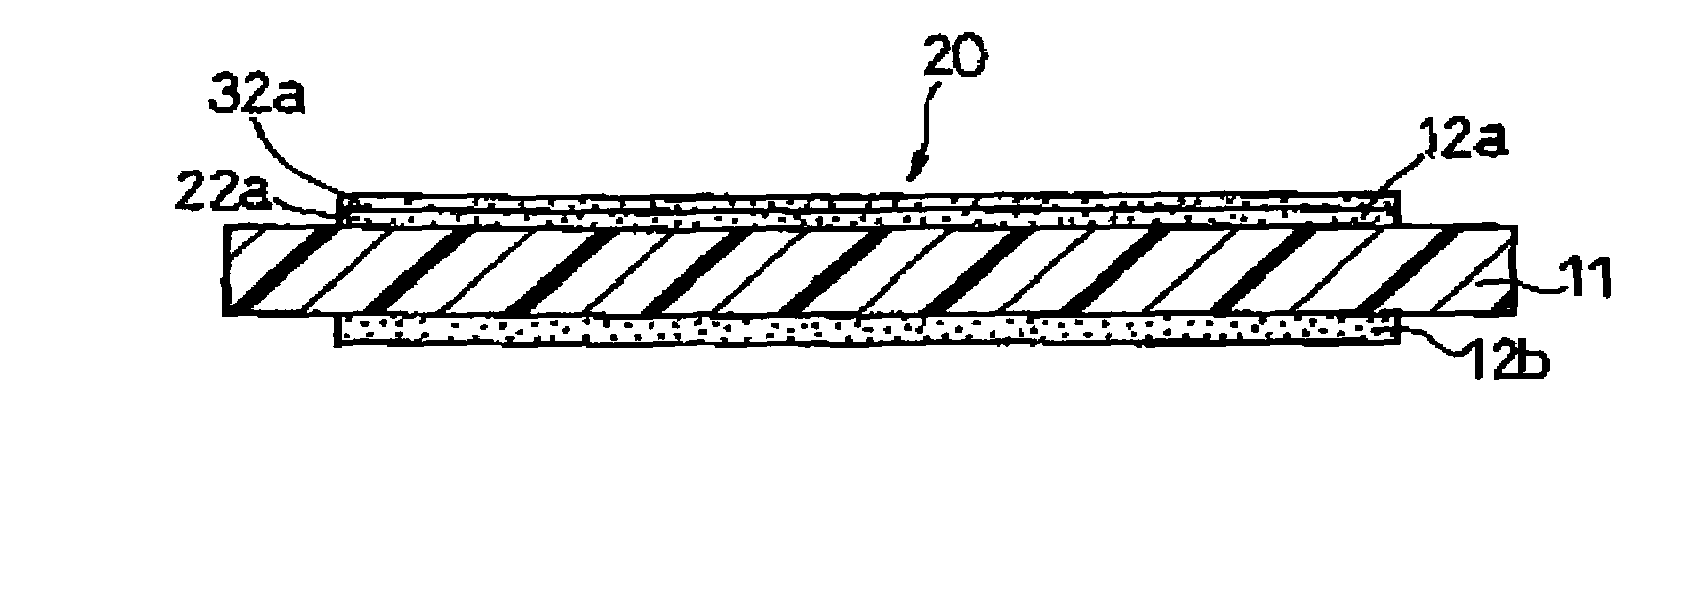 Catalyst-coated membrane, membrane-electrode assembly, and polymer electrolyte fuel cell